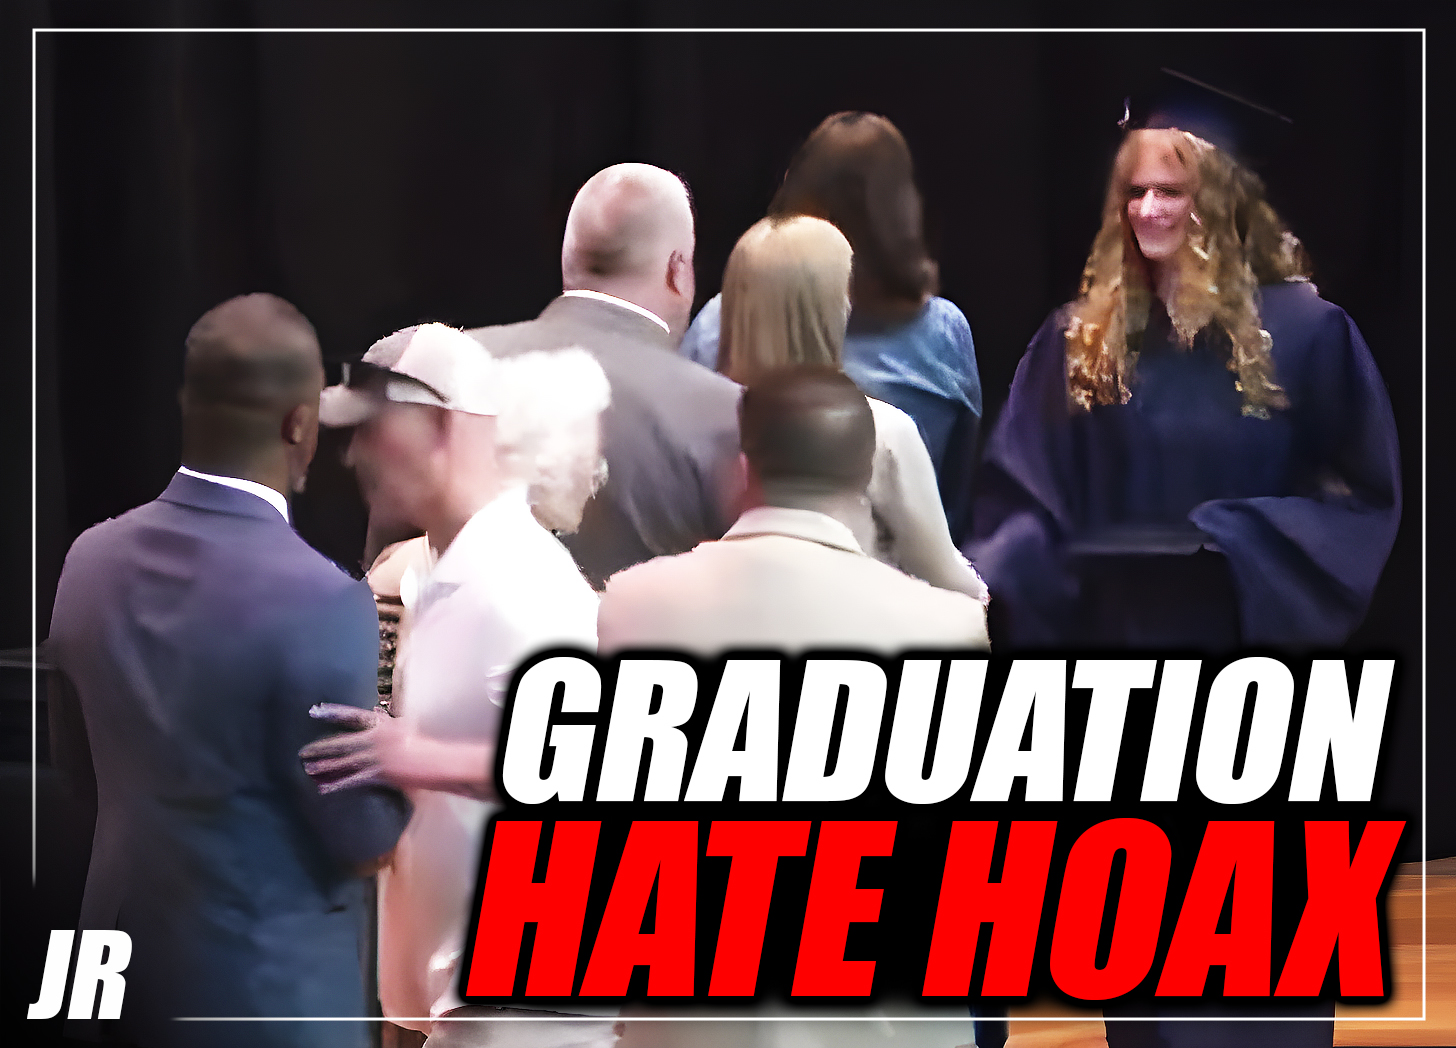 White man is falsely attacked for ‘racism’ at daughter’s high school graduation